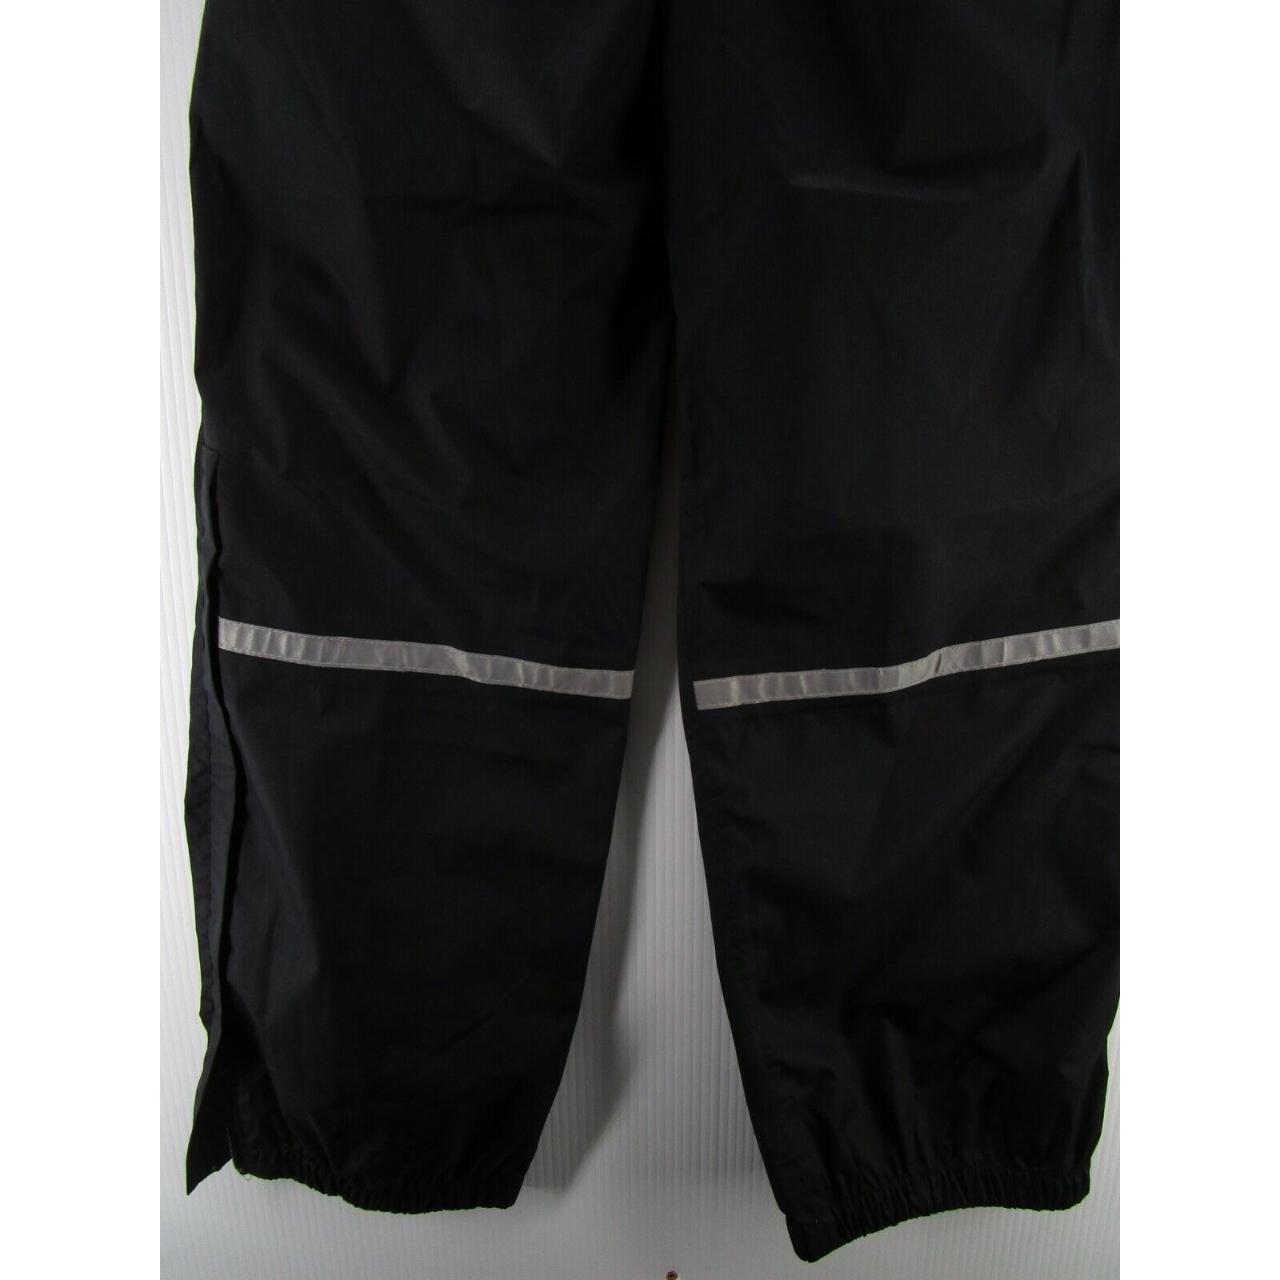 Waterproof long “track pants” from Decathlon, Men's Fashion, Activewear on  Carousell